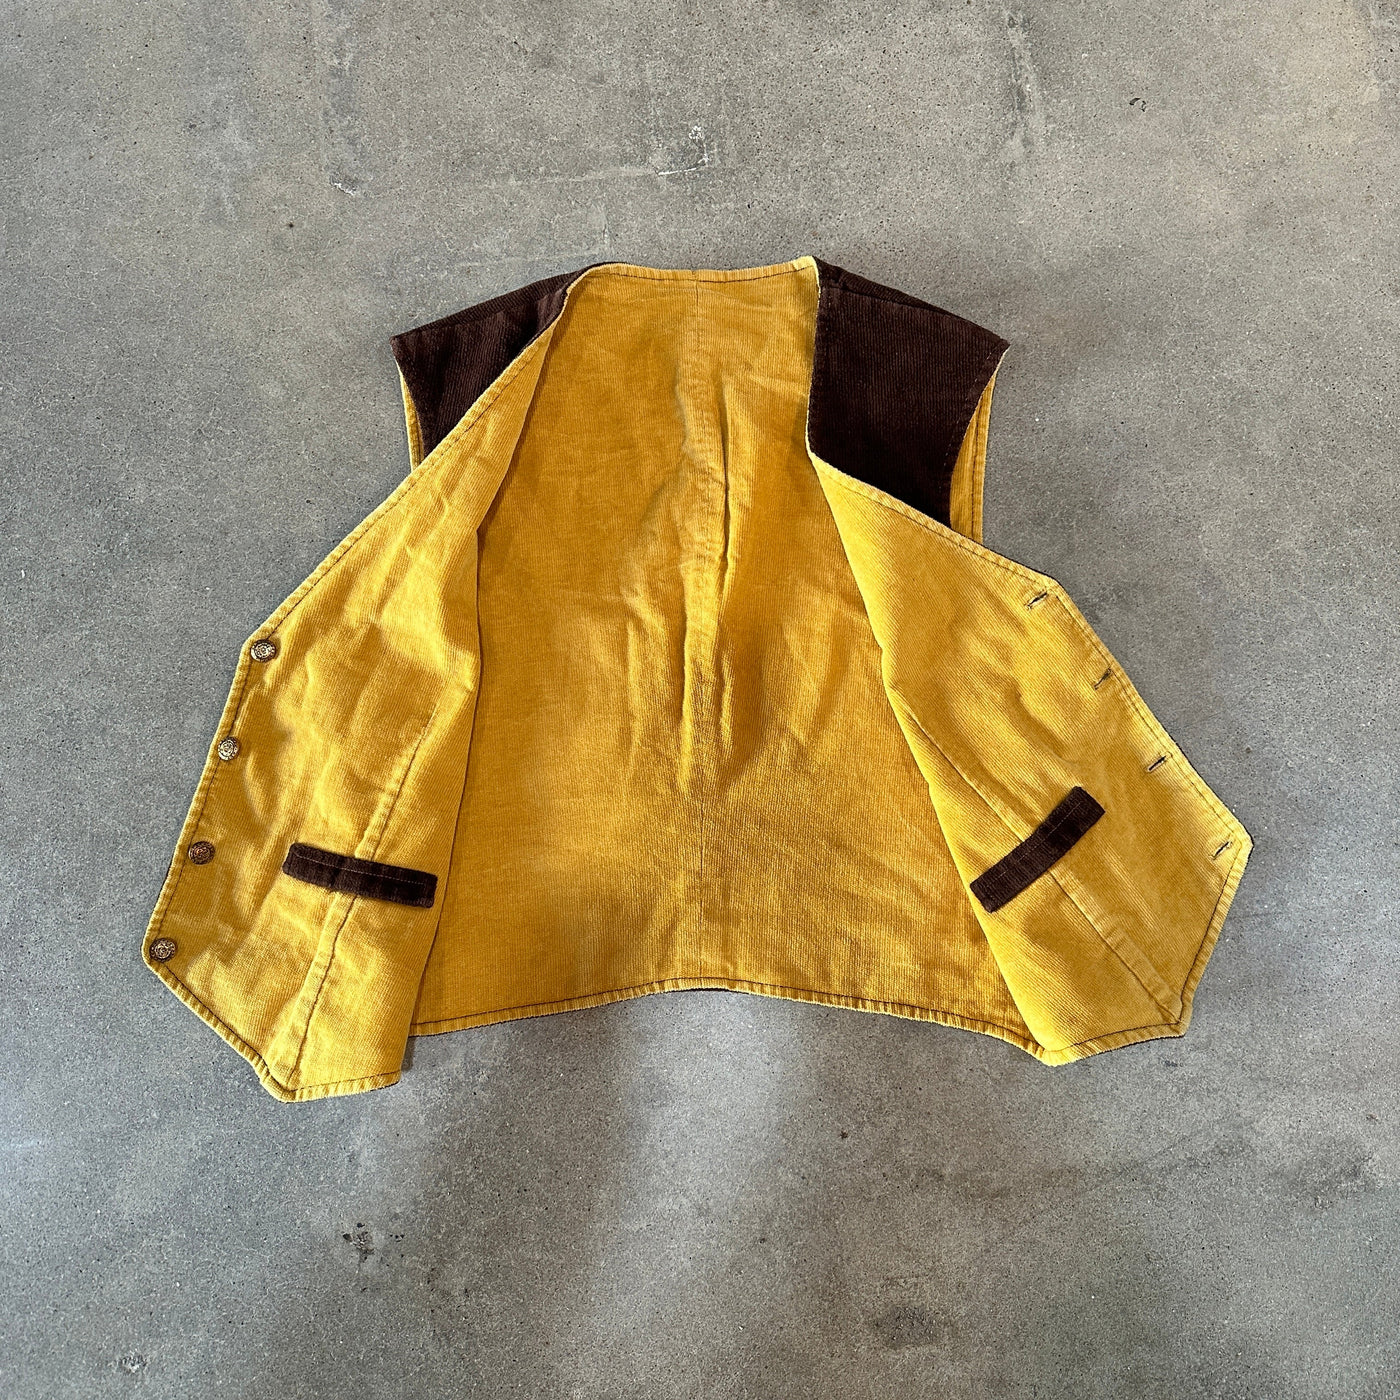 VTG reversible yellow and brown vest